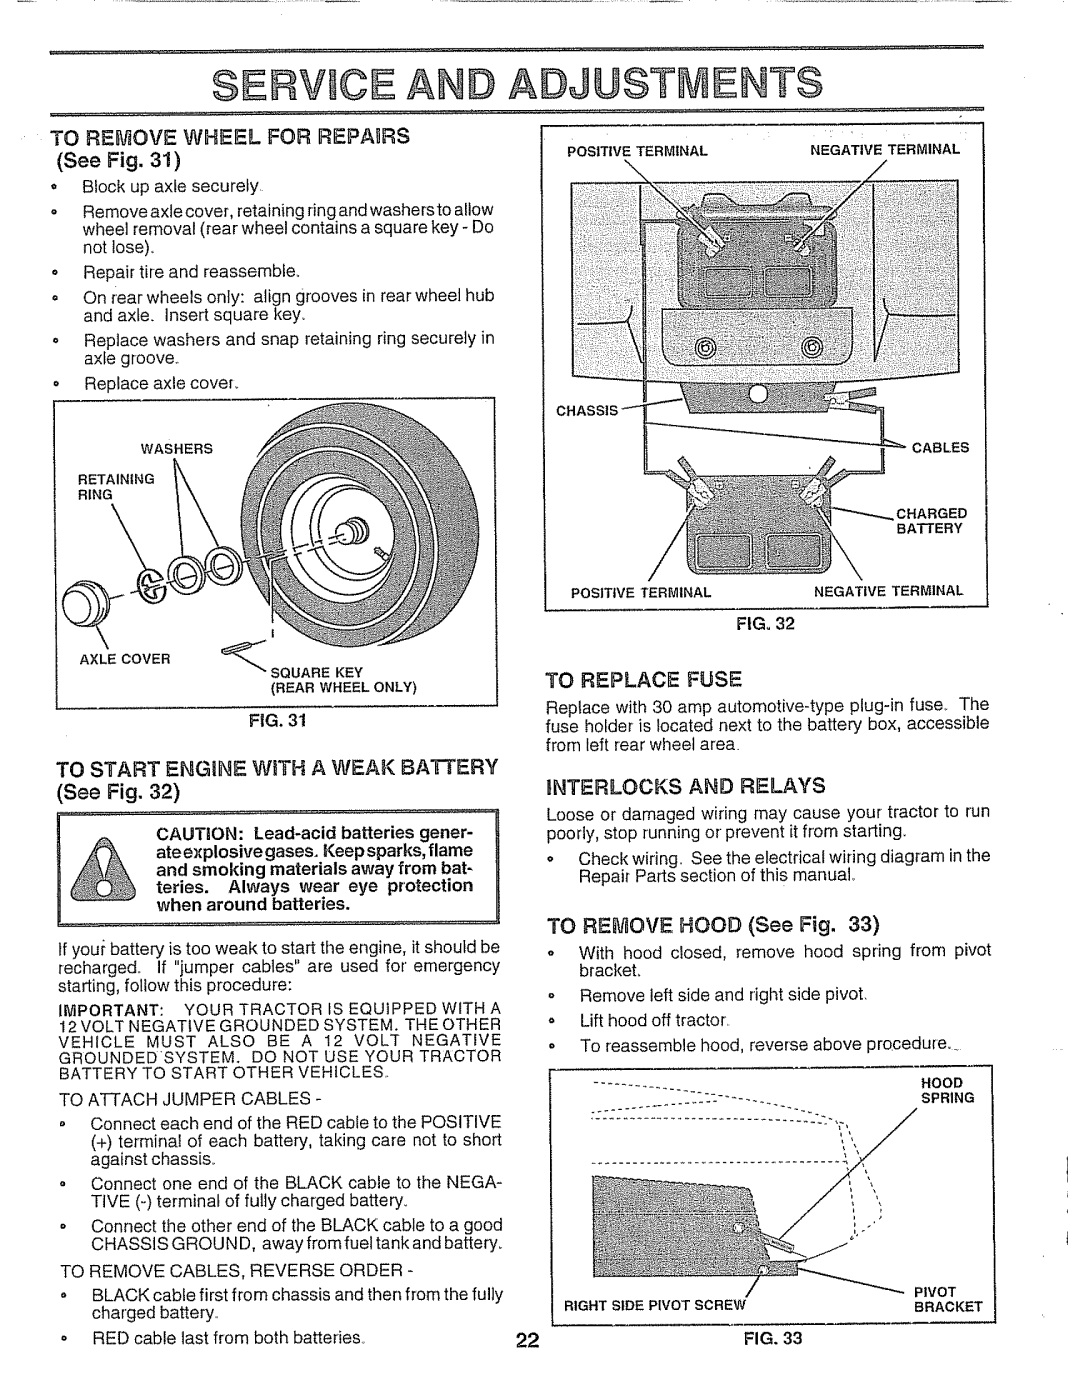 Craftsman 917.25693 owner manual TO REMOVE WHEEL FOR REPAnRS, To Replace Fuse, TO START ENGINE WtfTH A WEAK BATTERY See Fig 